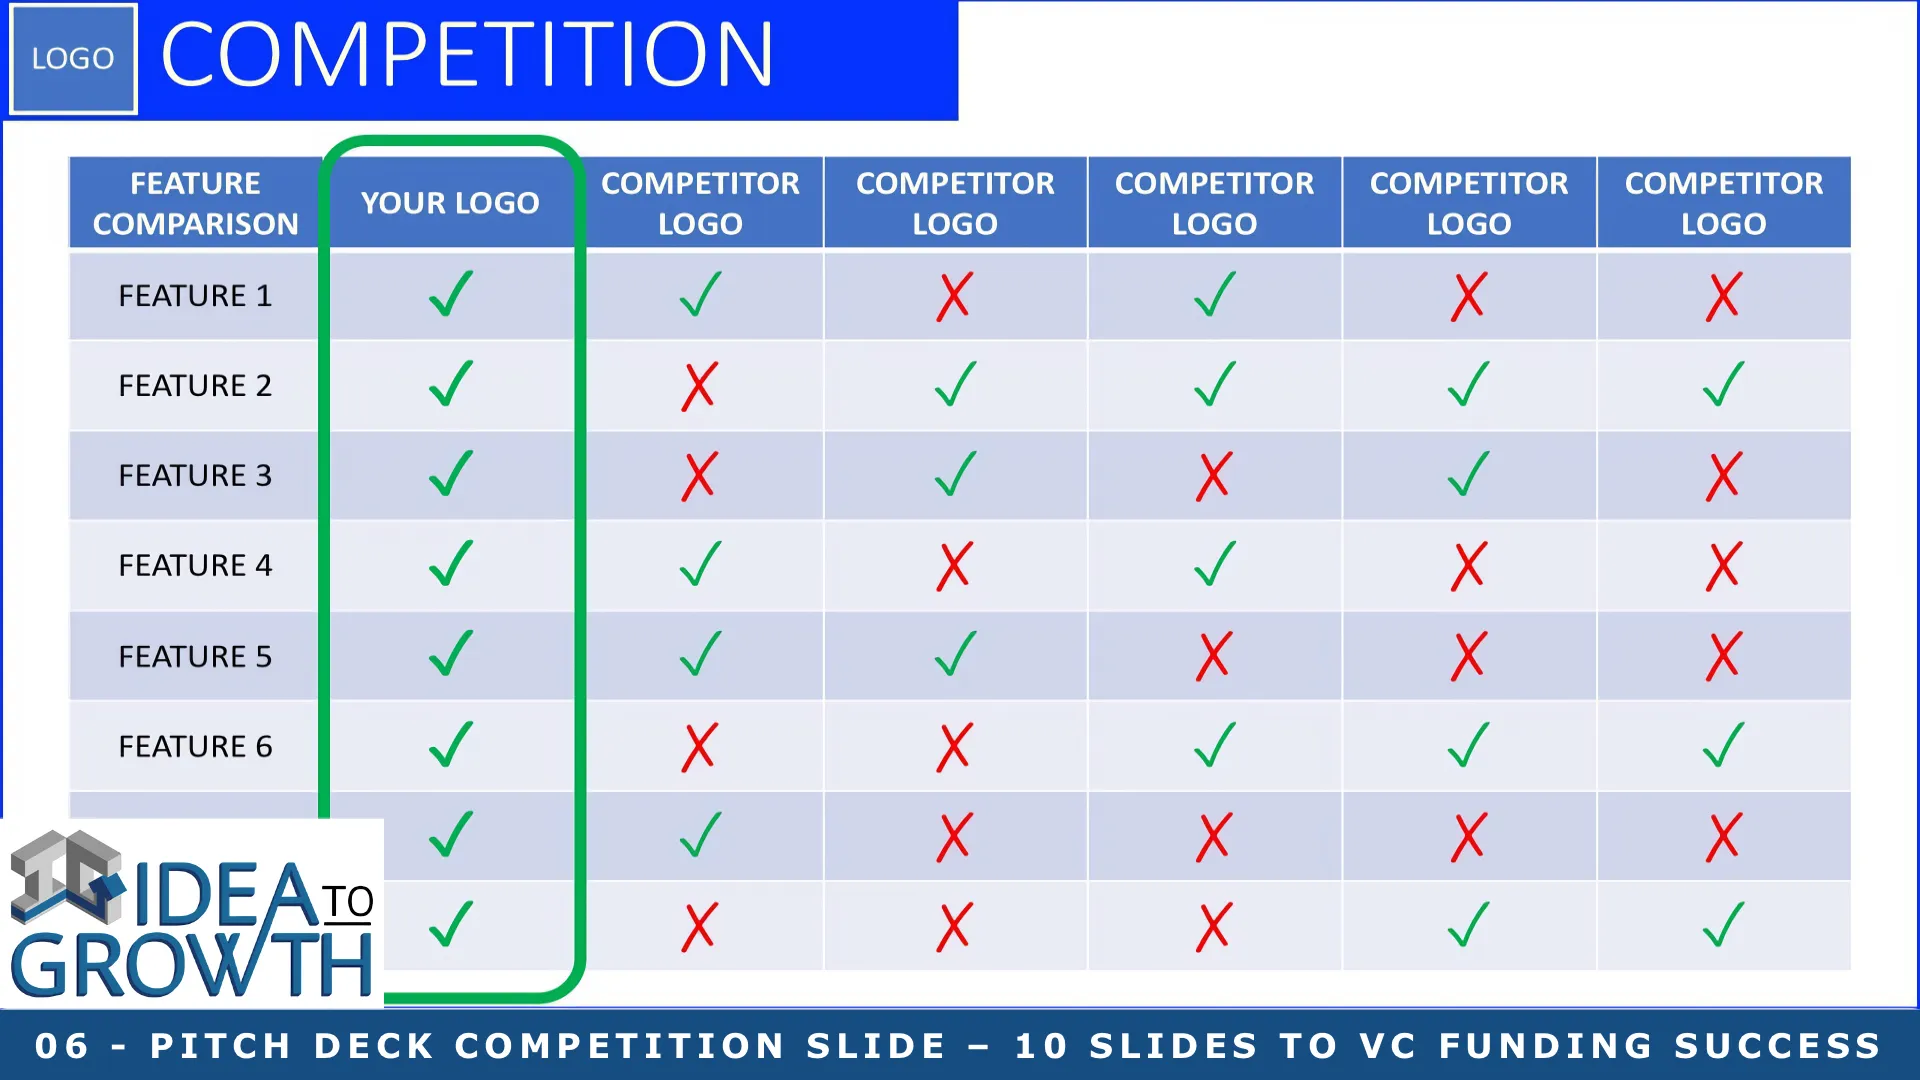 06 - PITCH DECK COMPETITION SLIDE – 10 SLIDES TO VC FUNDING SUCCESS